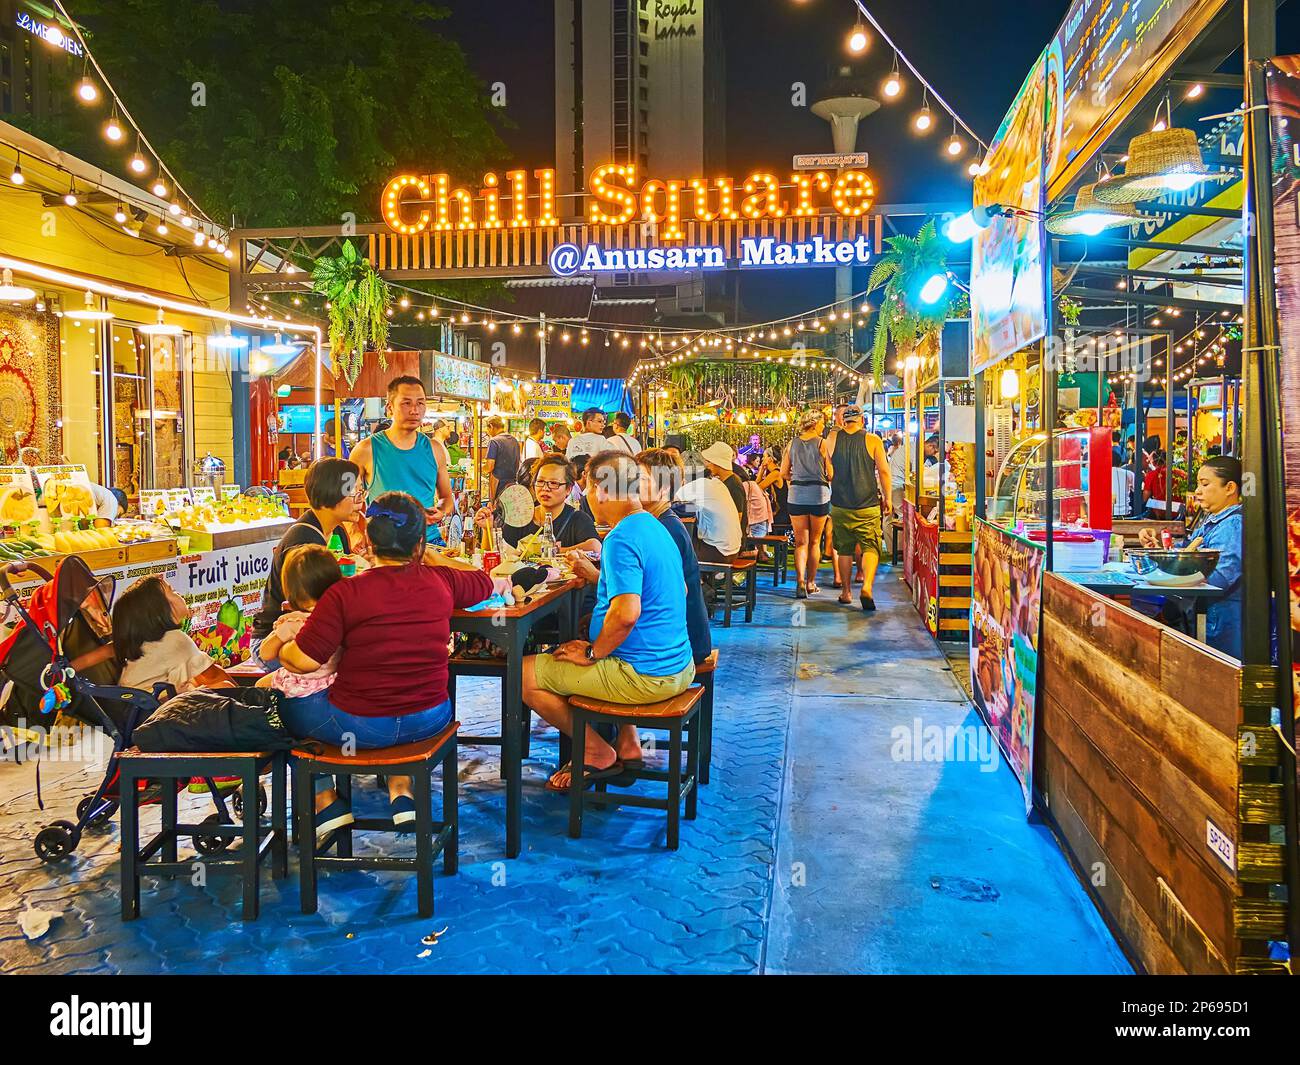 CHIANG MAI, THAILAND - MAY 3, 2019: The crowded food court in Chill Square of Anusarn Night Market with food stalls and tables of outdoor cafes, on Ma Stock Photo